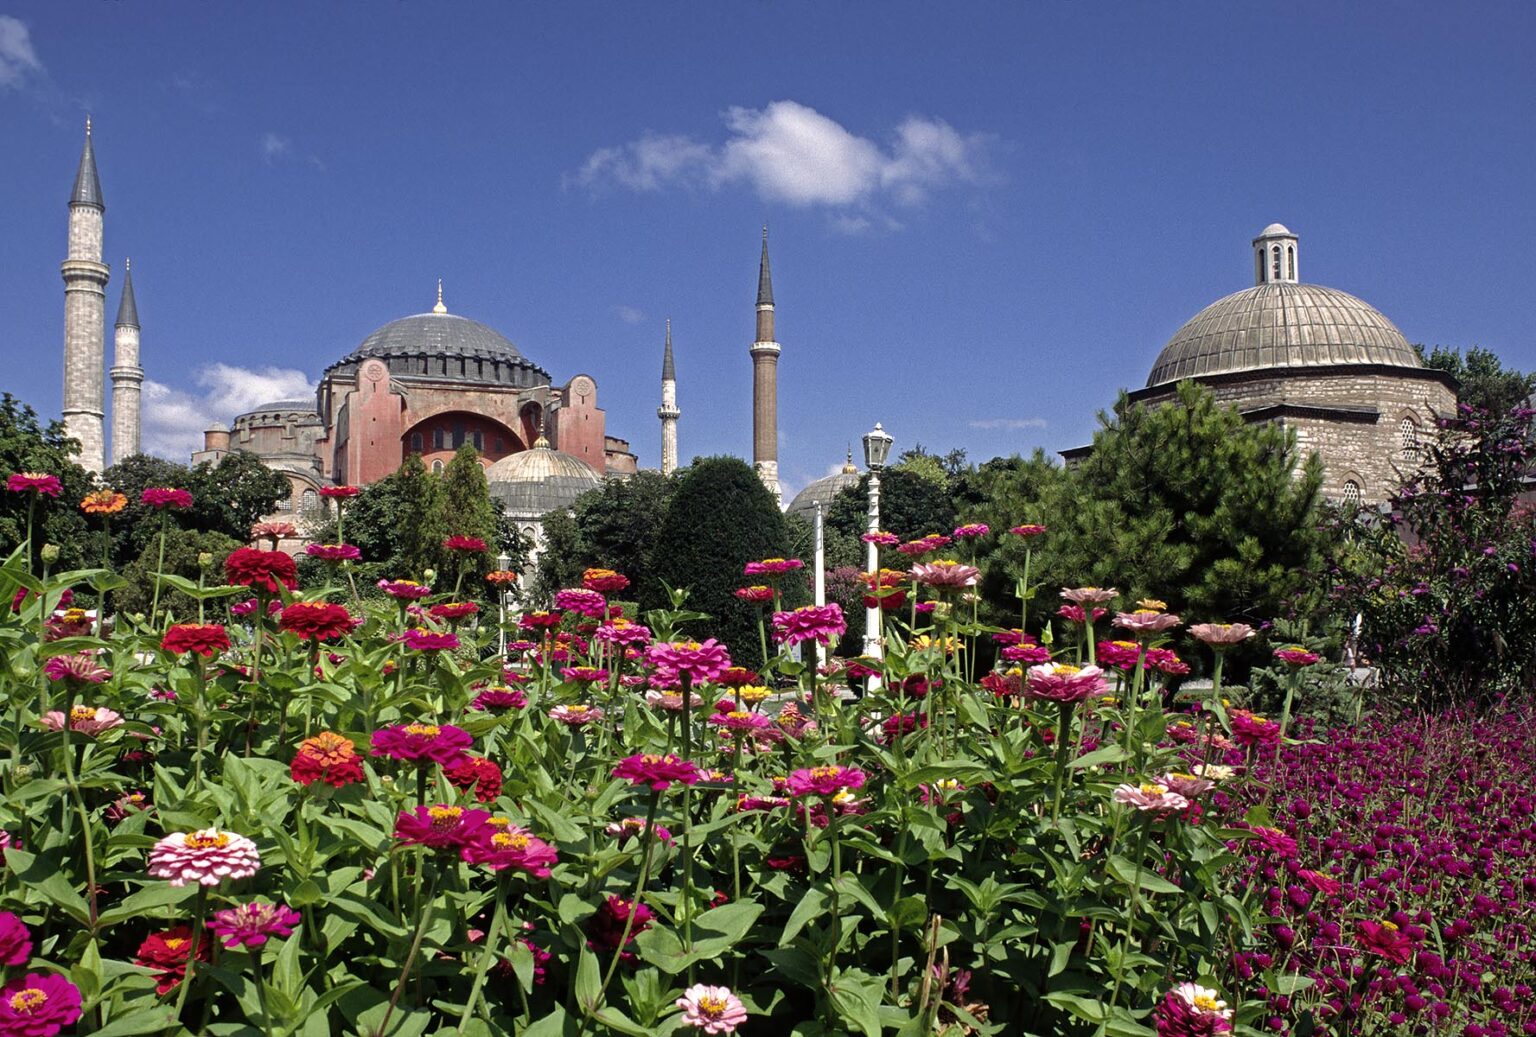 Flower gardens and The Ayasofya Camii (St Sophia Cathedral) - Byzantine church originally built in 537 AD, & eventually converted to a Mosque - Istanbul, Turkey